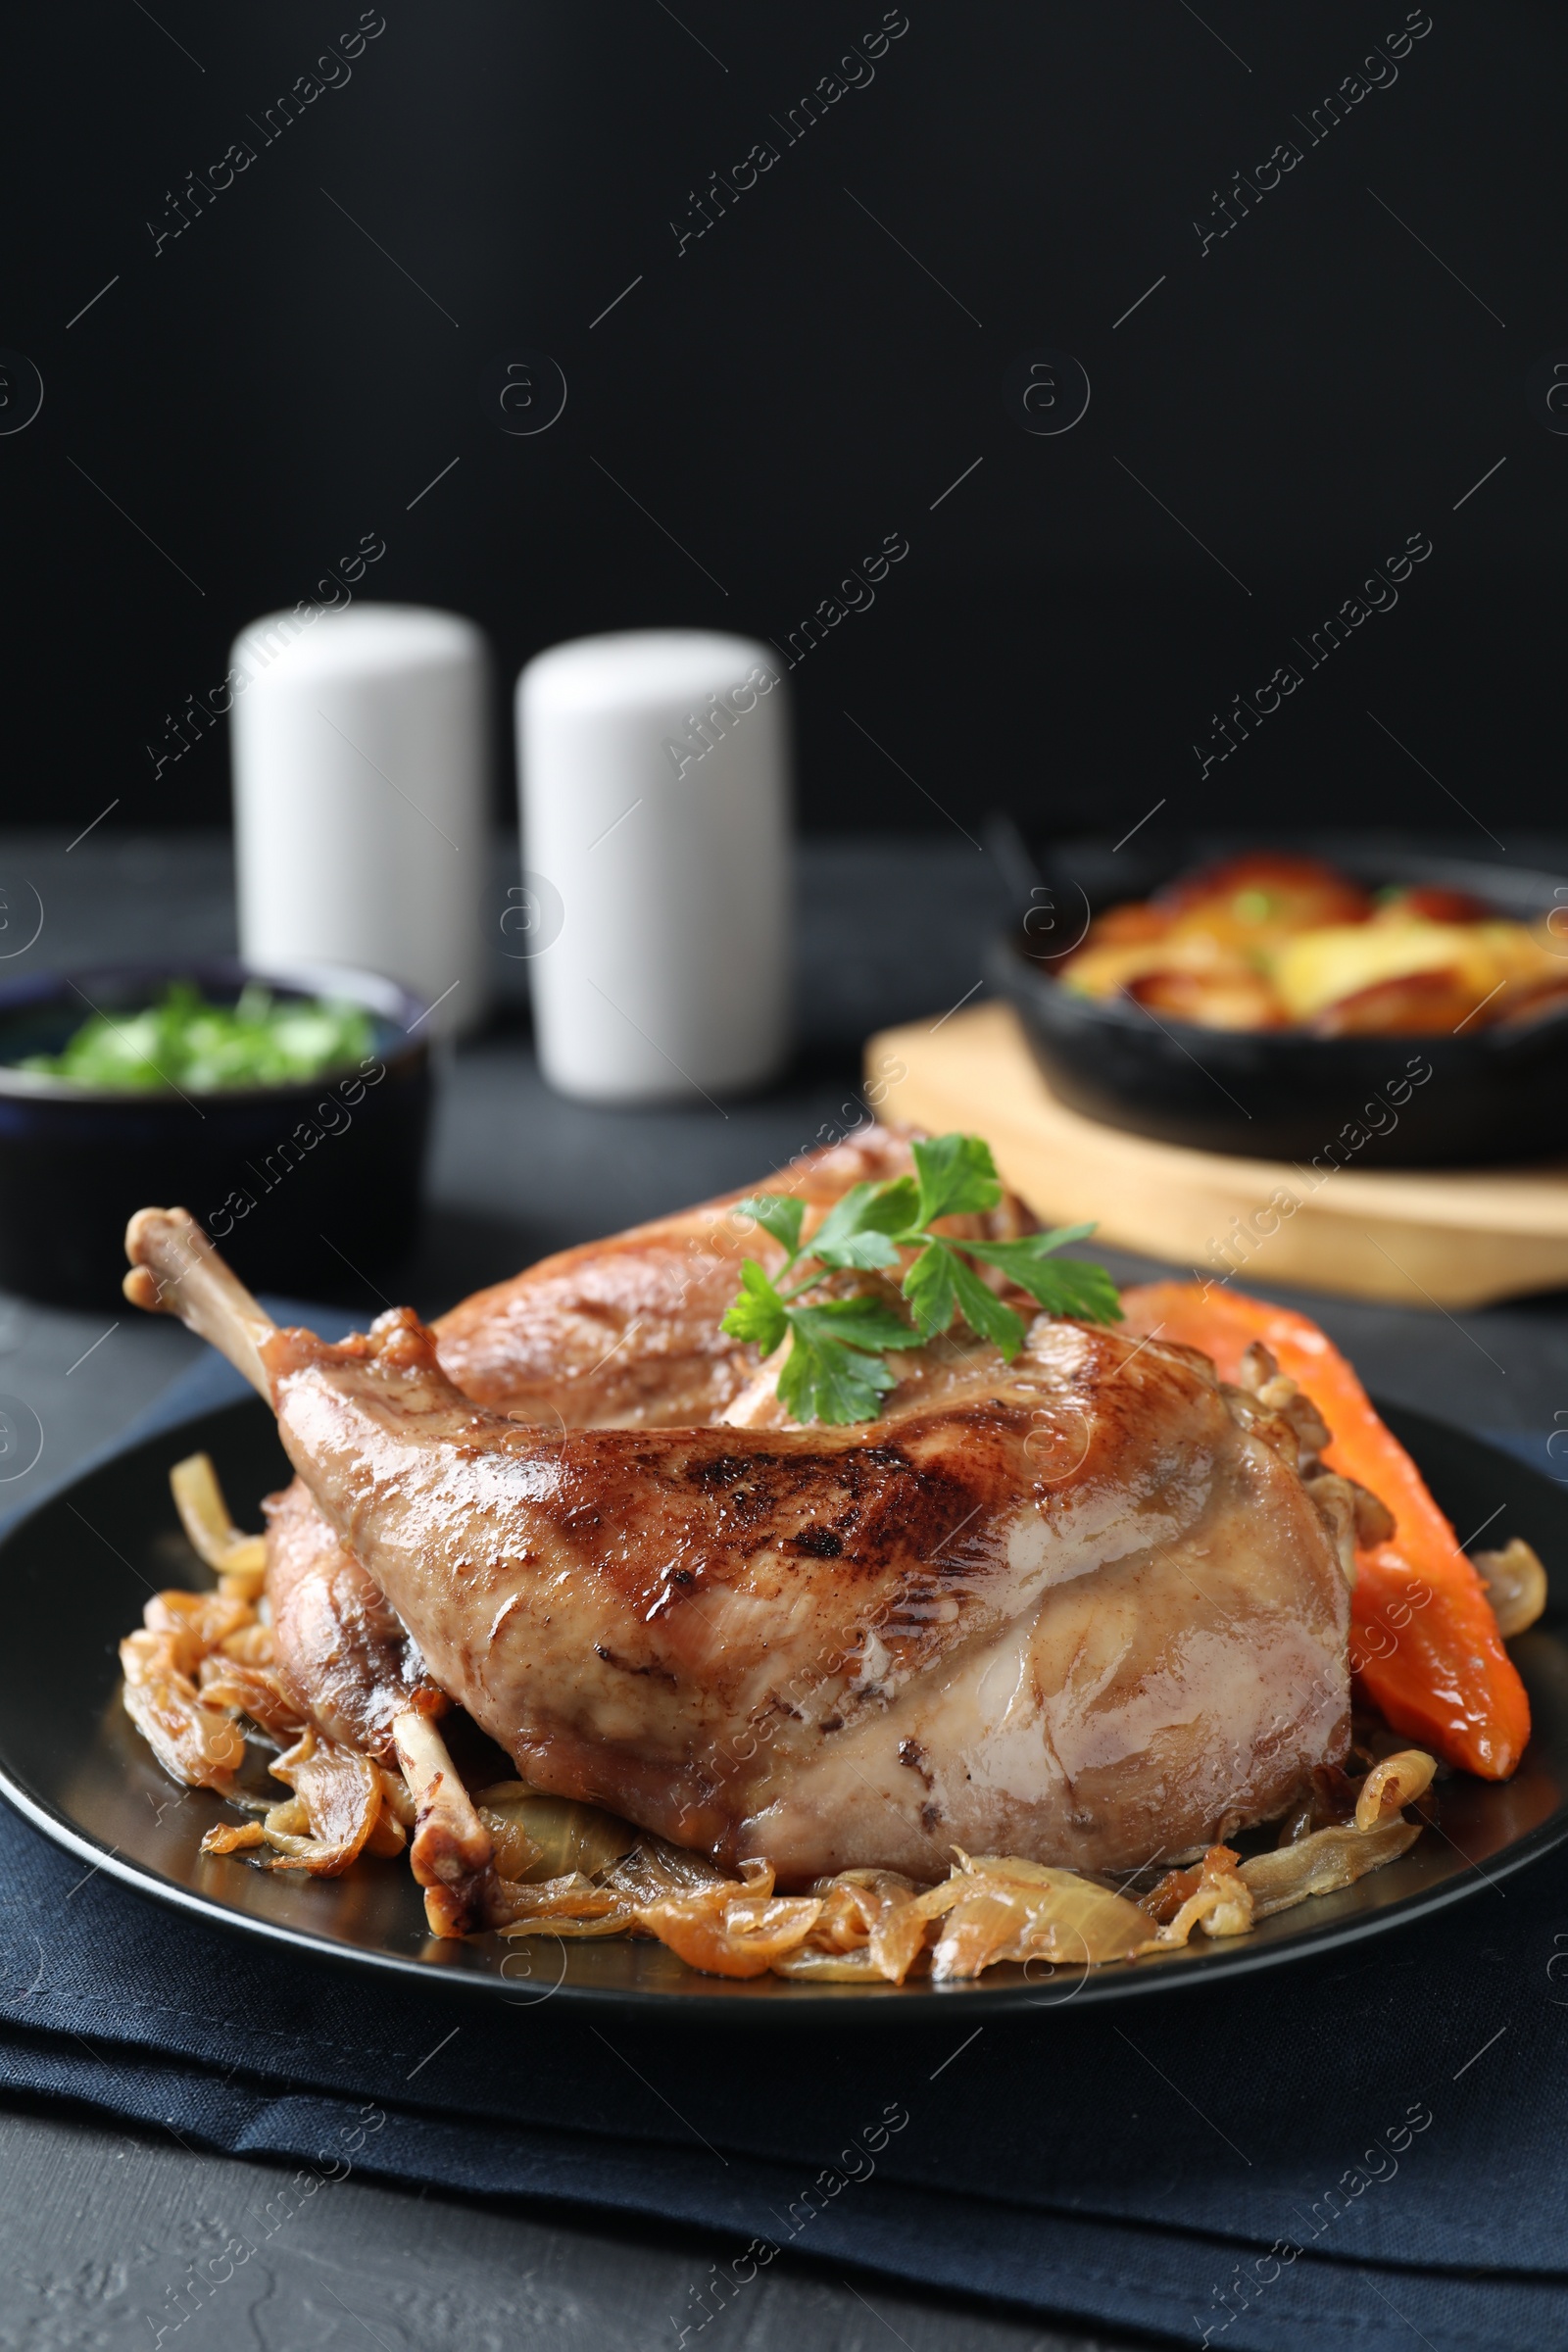 Photo of Tasty cooked rabbit meat with vegetables served on table